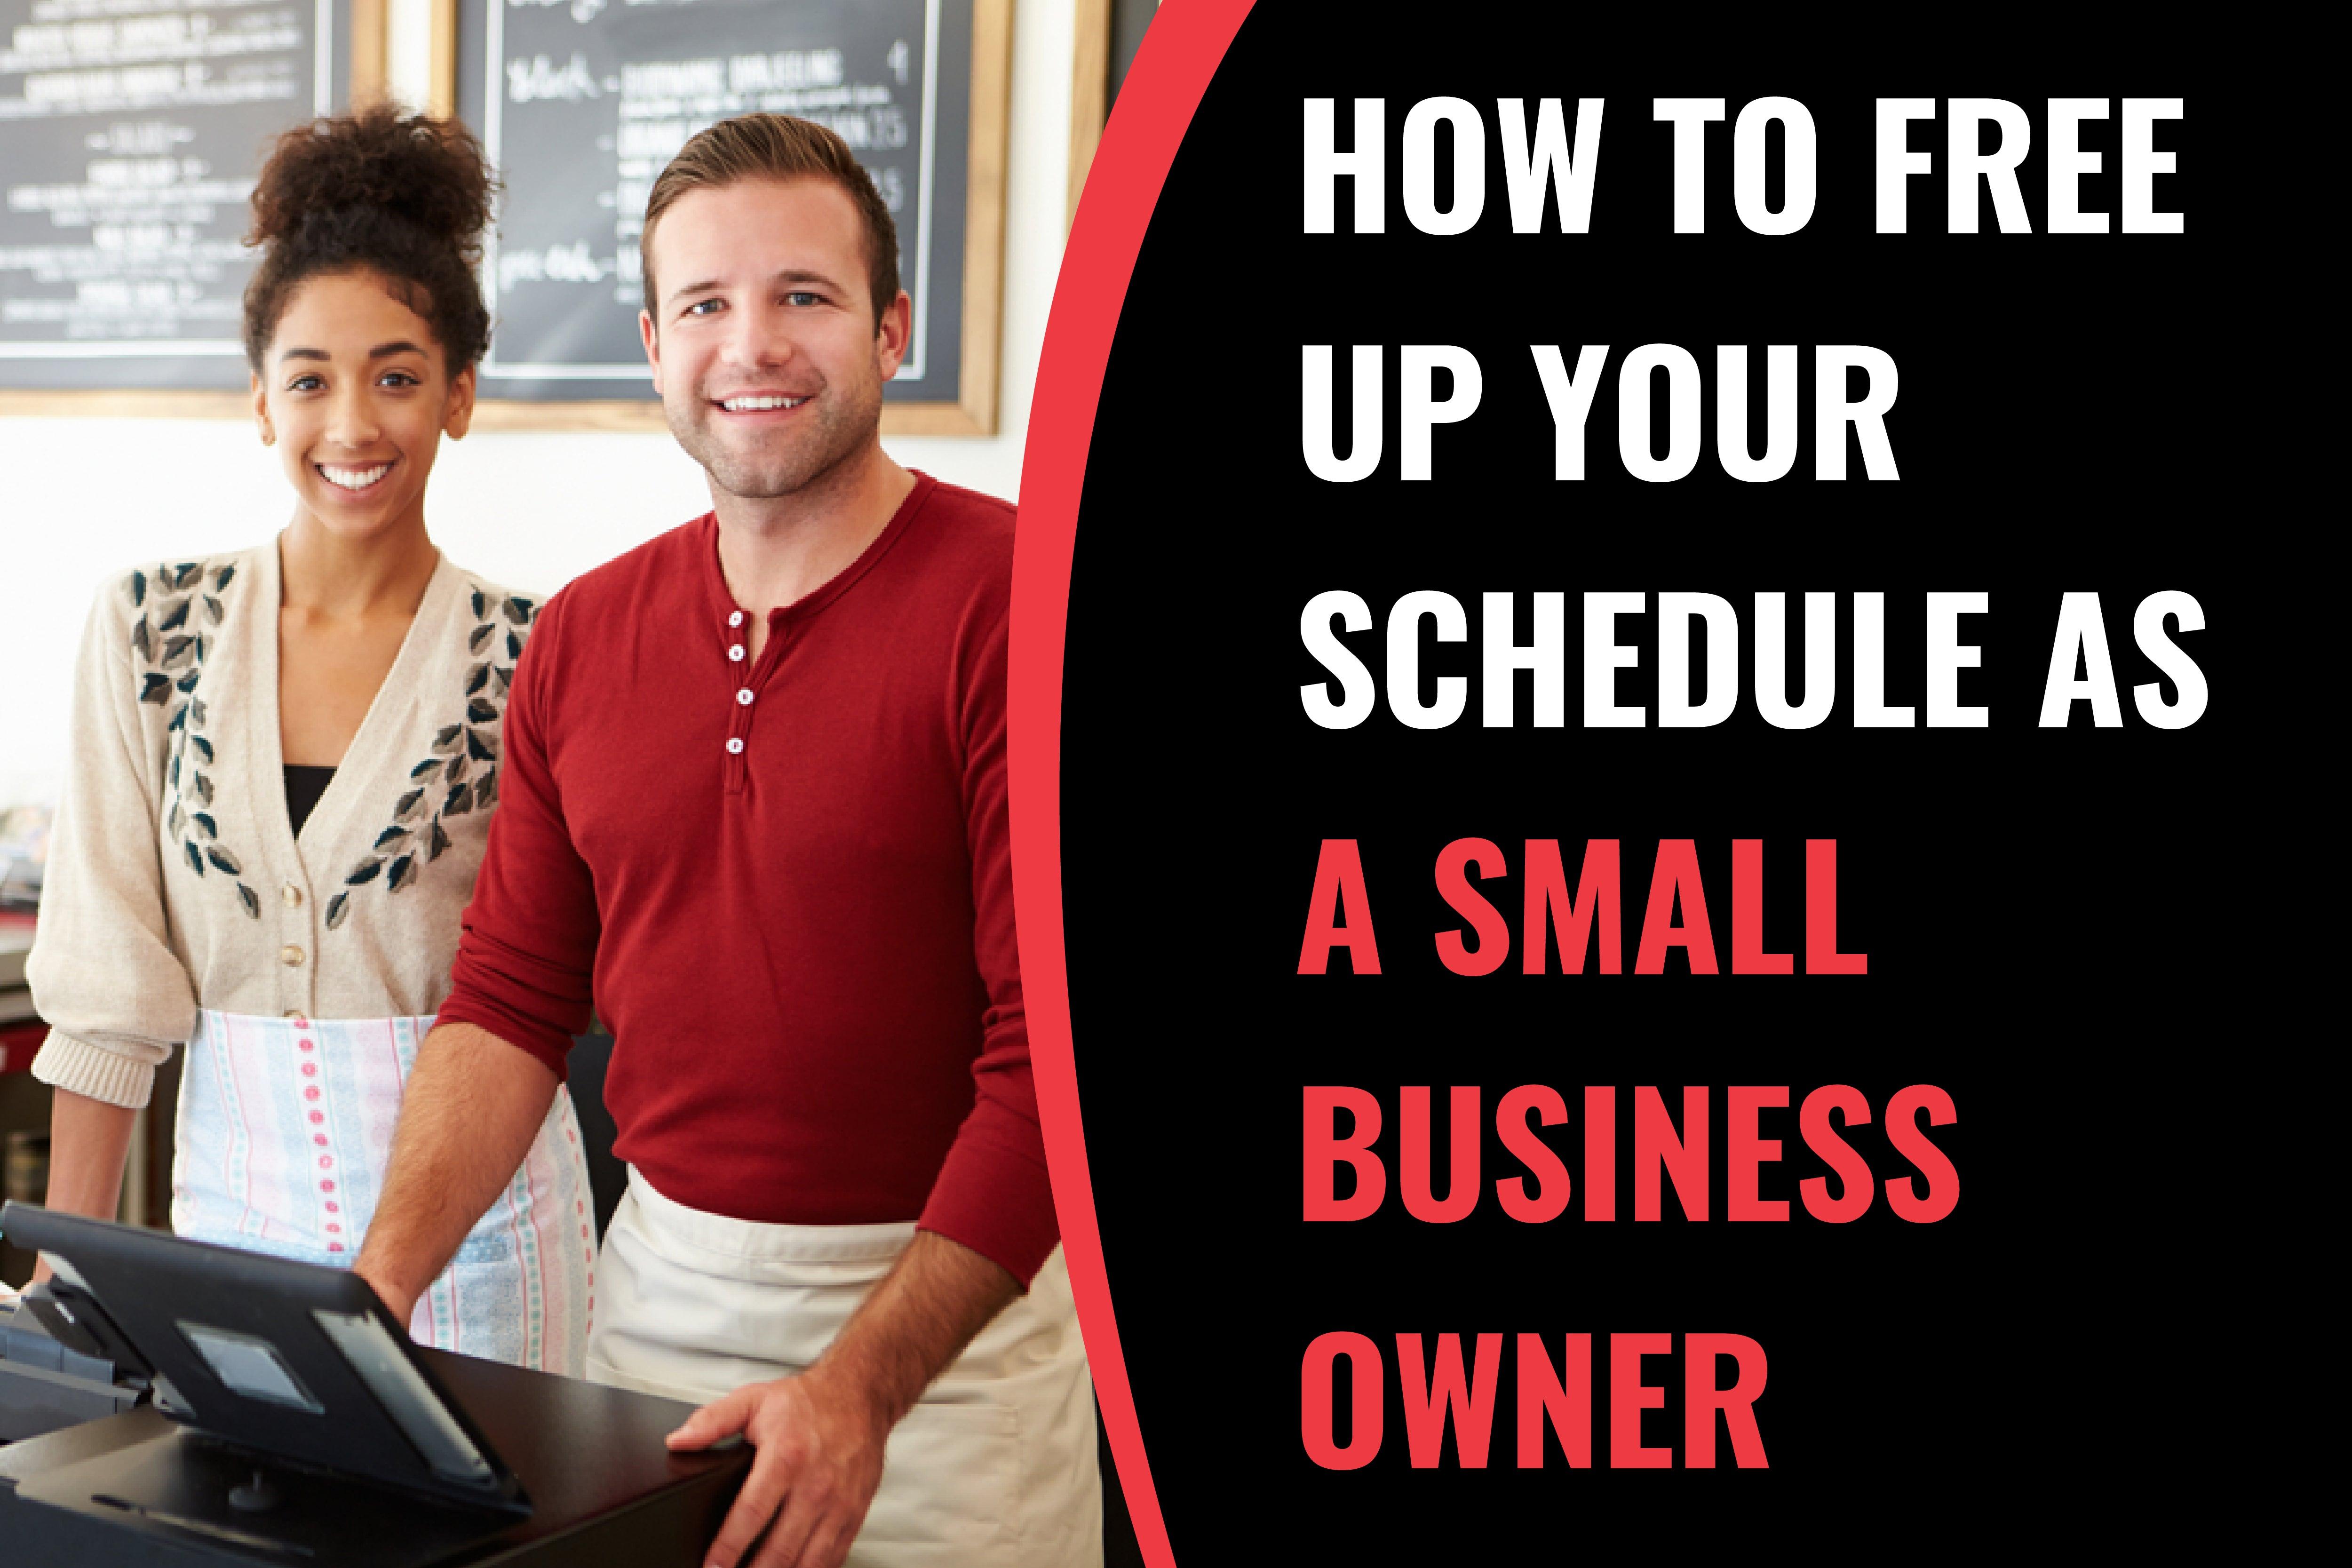 Vending Business: How to Free Up Your Schedule as a Small Business Owner - Vendnet